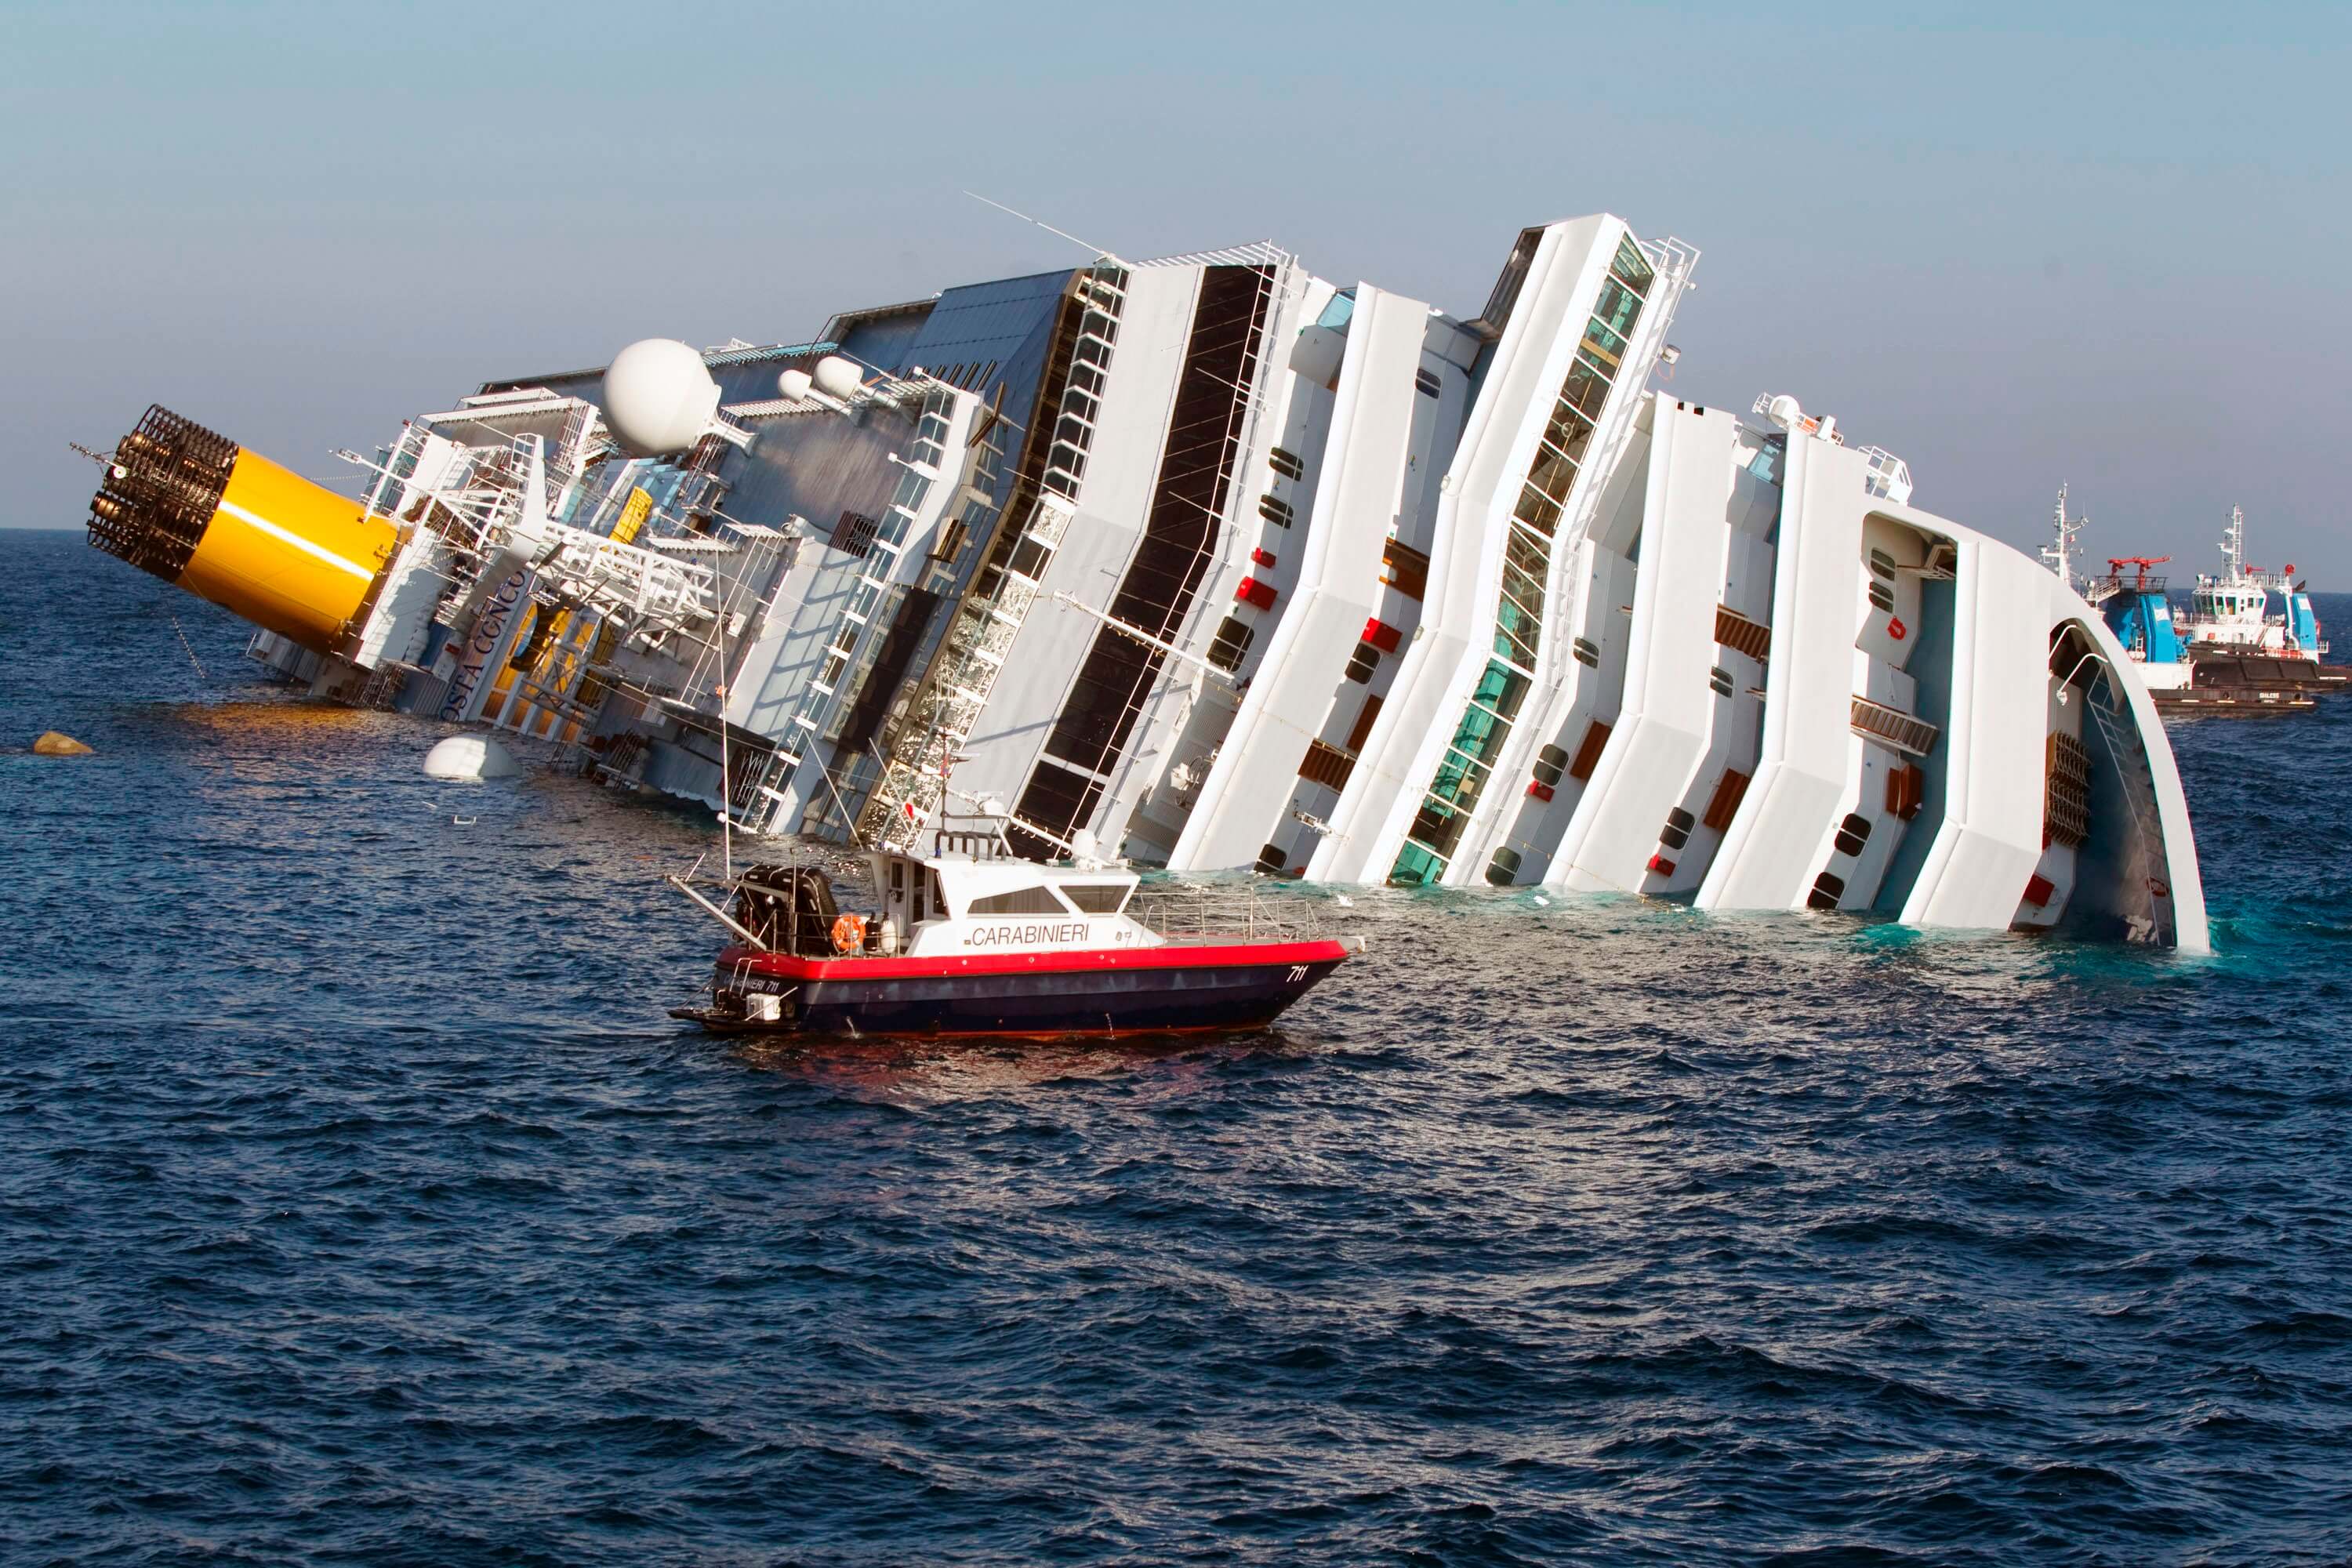 The Sinking of Concordia Caught on Camera